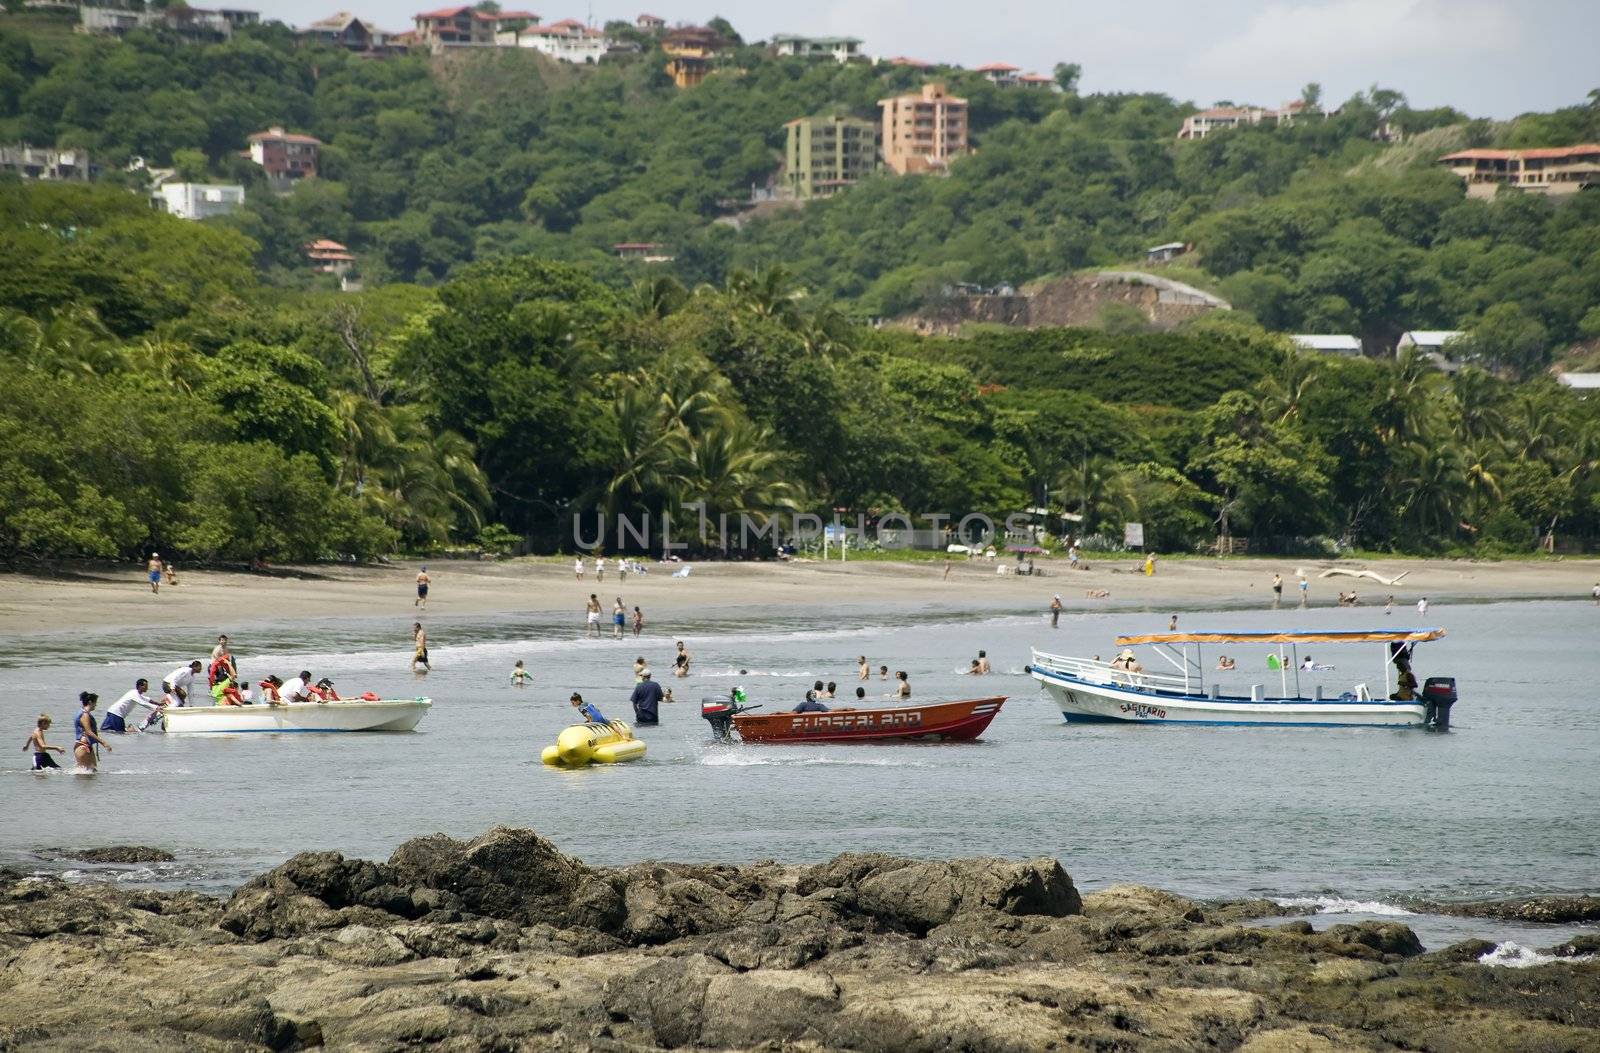 People and boats in the water at Playa Hermosa Costa Rica 